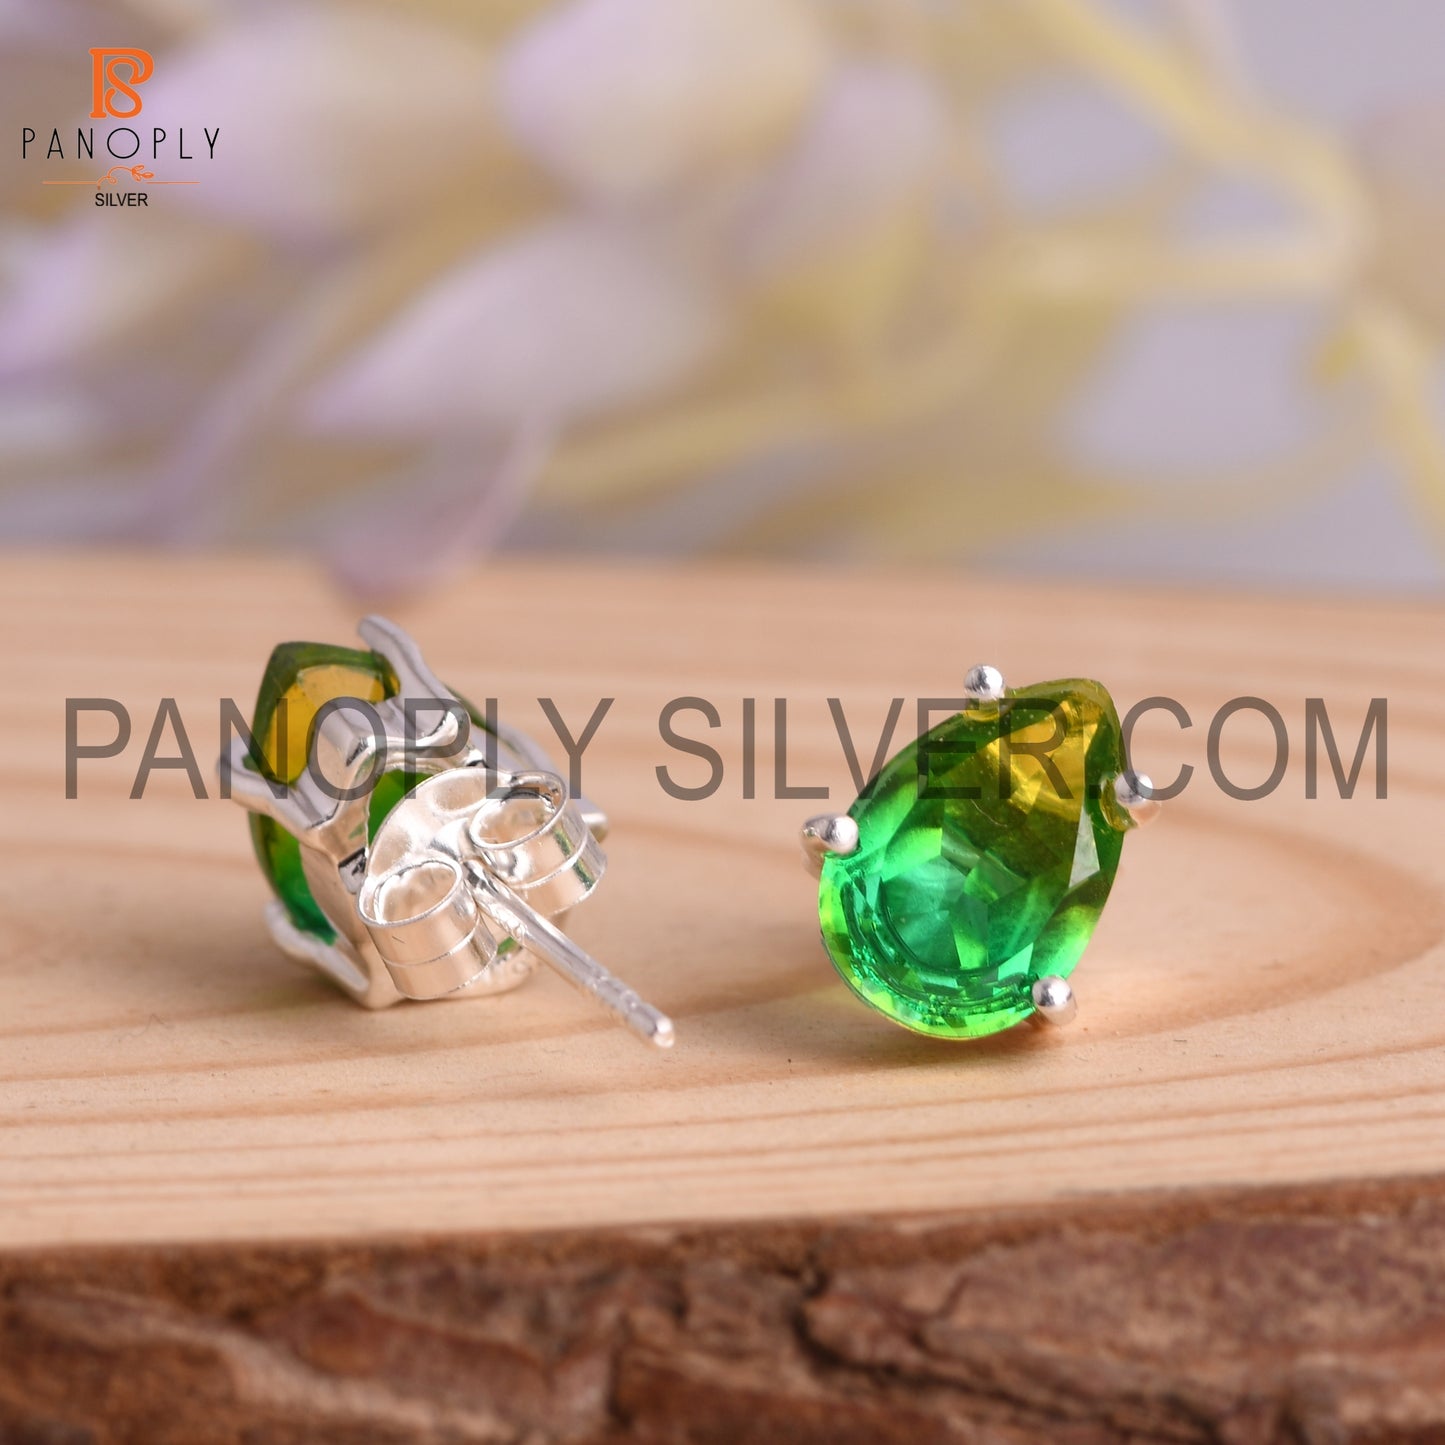 Bio Chrome Diopside Doublet 925Quality Pear Earrings